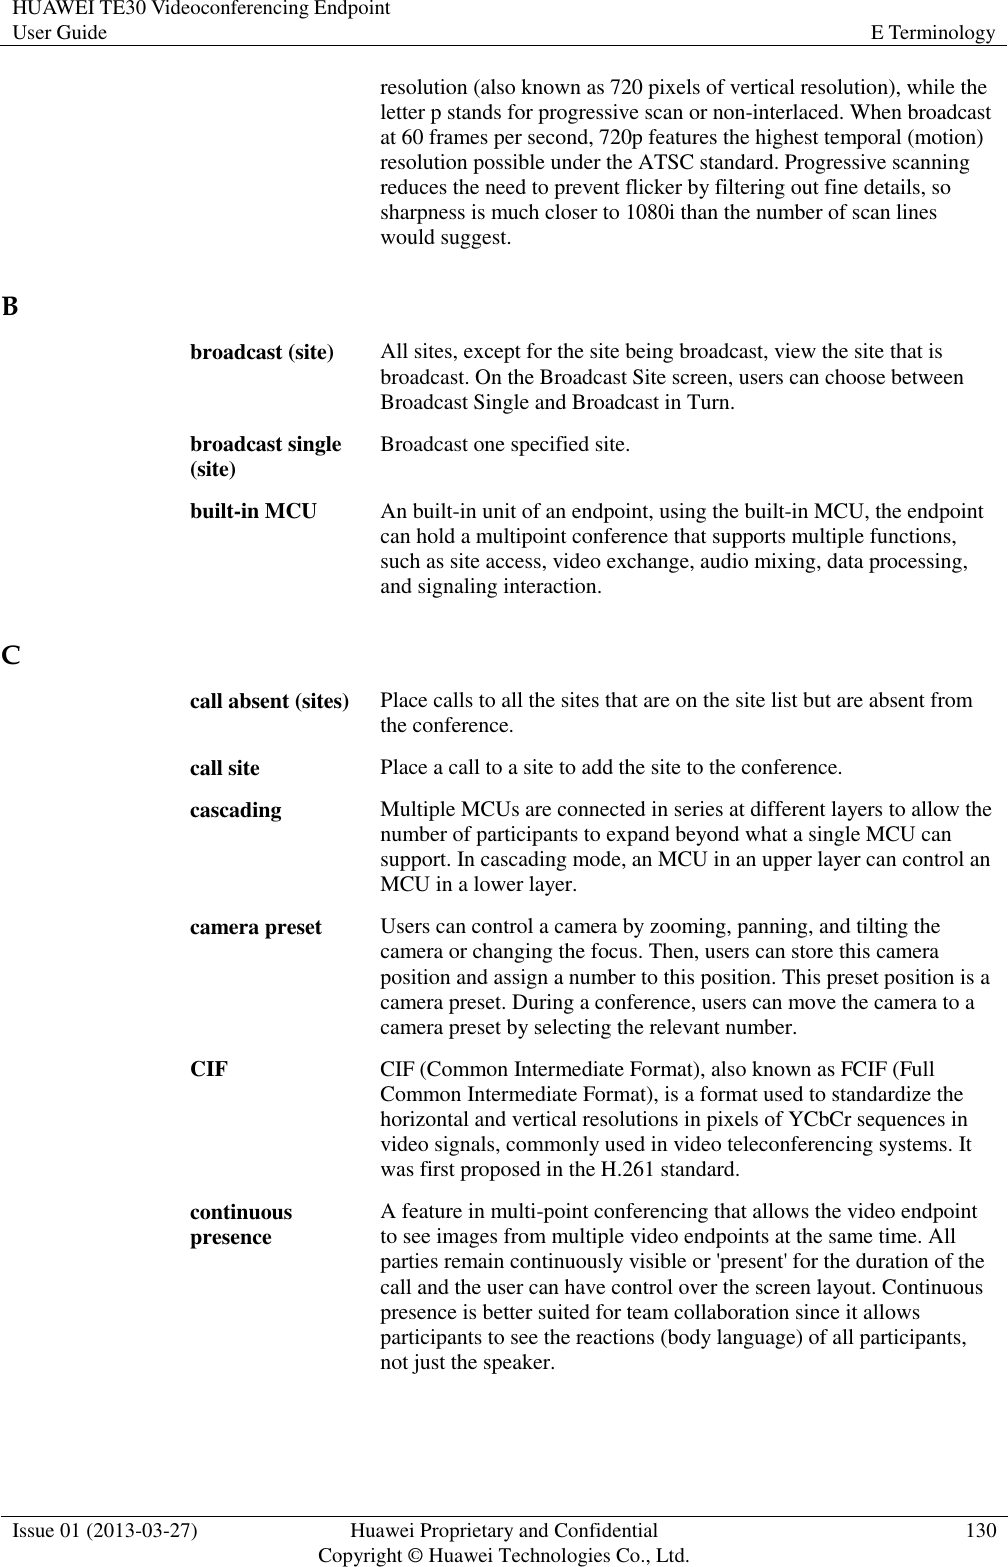 HUAWEI TE30 Videoconferencing Endpoint User Guide E Terminology  Issue 01 (2013-03-27) Huawei Proprietary and Confidential                                     Copyright © Huawei Technologies Co., Ltd. 130  resolution (also known as 720 pixels of vertical resolution), while the letter p stands for progressive scan or non-interlaced. When broadcast at 60 frames per second, 720p features the highest temporal (motion) resolution possible under the ATSC standard. Progressive scanning reduces the need to prevent flicker by filtering out fine details, so sharpness is much closer to 1080i than the number of scan lines would suggest. B broadcast (site) All sites, except for the site being broadcast, view the site that is broadcast. On the Broadcast Site screen, users can choose between Broadcast Single and Broadcast in Turn. broadcast single (site) Broadcast one specified site. built-in MCU An built-in unit of an endpoint, using the built-in MCU, the endpoint can hold a multipoint conference that supports multiple functions, such as site access, video exchange, audio mixing, data processing, and signaling interaction. C call absent (sites) Place calls to all the sites that are on the site list but are absent from the conference. call site Place a call to a site to add the site to the conference. cascading Multiple MCUs are connected in series at different layers to allow the number of participants to expand beyond what a single MCU can support. In cascading mode, an MCU in an upper layer can control an MCU in a lower layer. camera preset Users can control a camera by zooming, panning, and tilting the camera or changing the focus. Then, users can store this camera position and assign a number to this position. This preset position is a camera preset. During a conference, users can move the camera to a camera preset by selecting the relevant number. CIF CIF (Common Intermediate Format), also known as FCIF (Full Common Intermediate Format), is a format used to standardize the horizontal and vertical resolutions in pixels of YCbCr sequences in video signals, commonly used in video teleconferencing systems. It was first proposed in the H.261 standard. continuous presence A feature in multi-point conferencing that allows the video endpoint to see images from multiple video endpoints at the same time. All parties remain continuously visible or &apos;present&apos; for the duration of the call and the user can have control over the screen layout. Continuous presence is better suited for team collaboration since it allows participants to see the reactions (body language) of all participants, not just the speaker. 